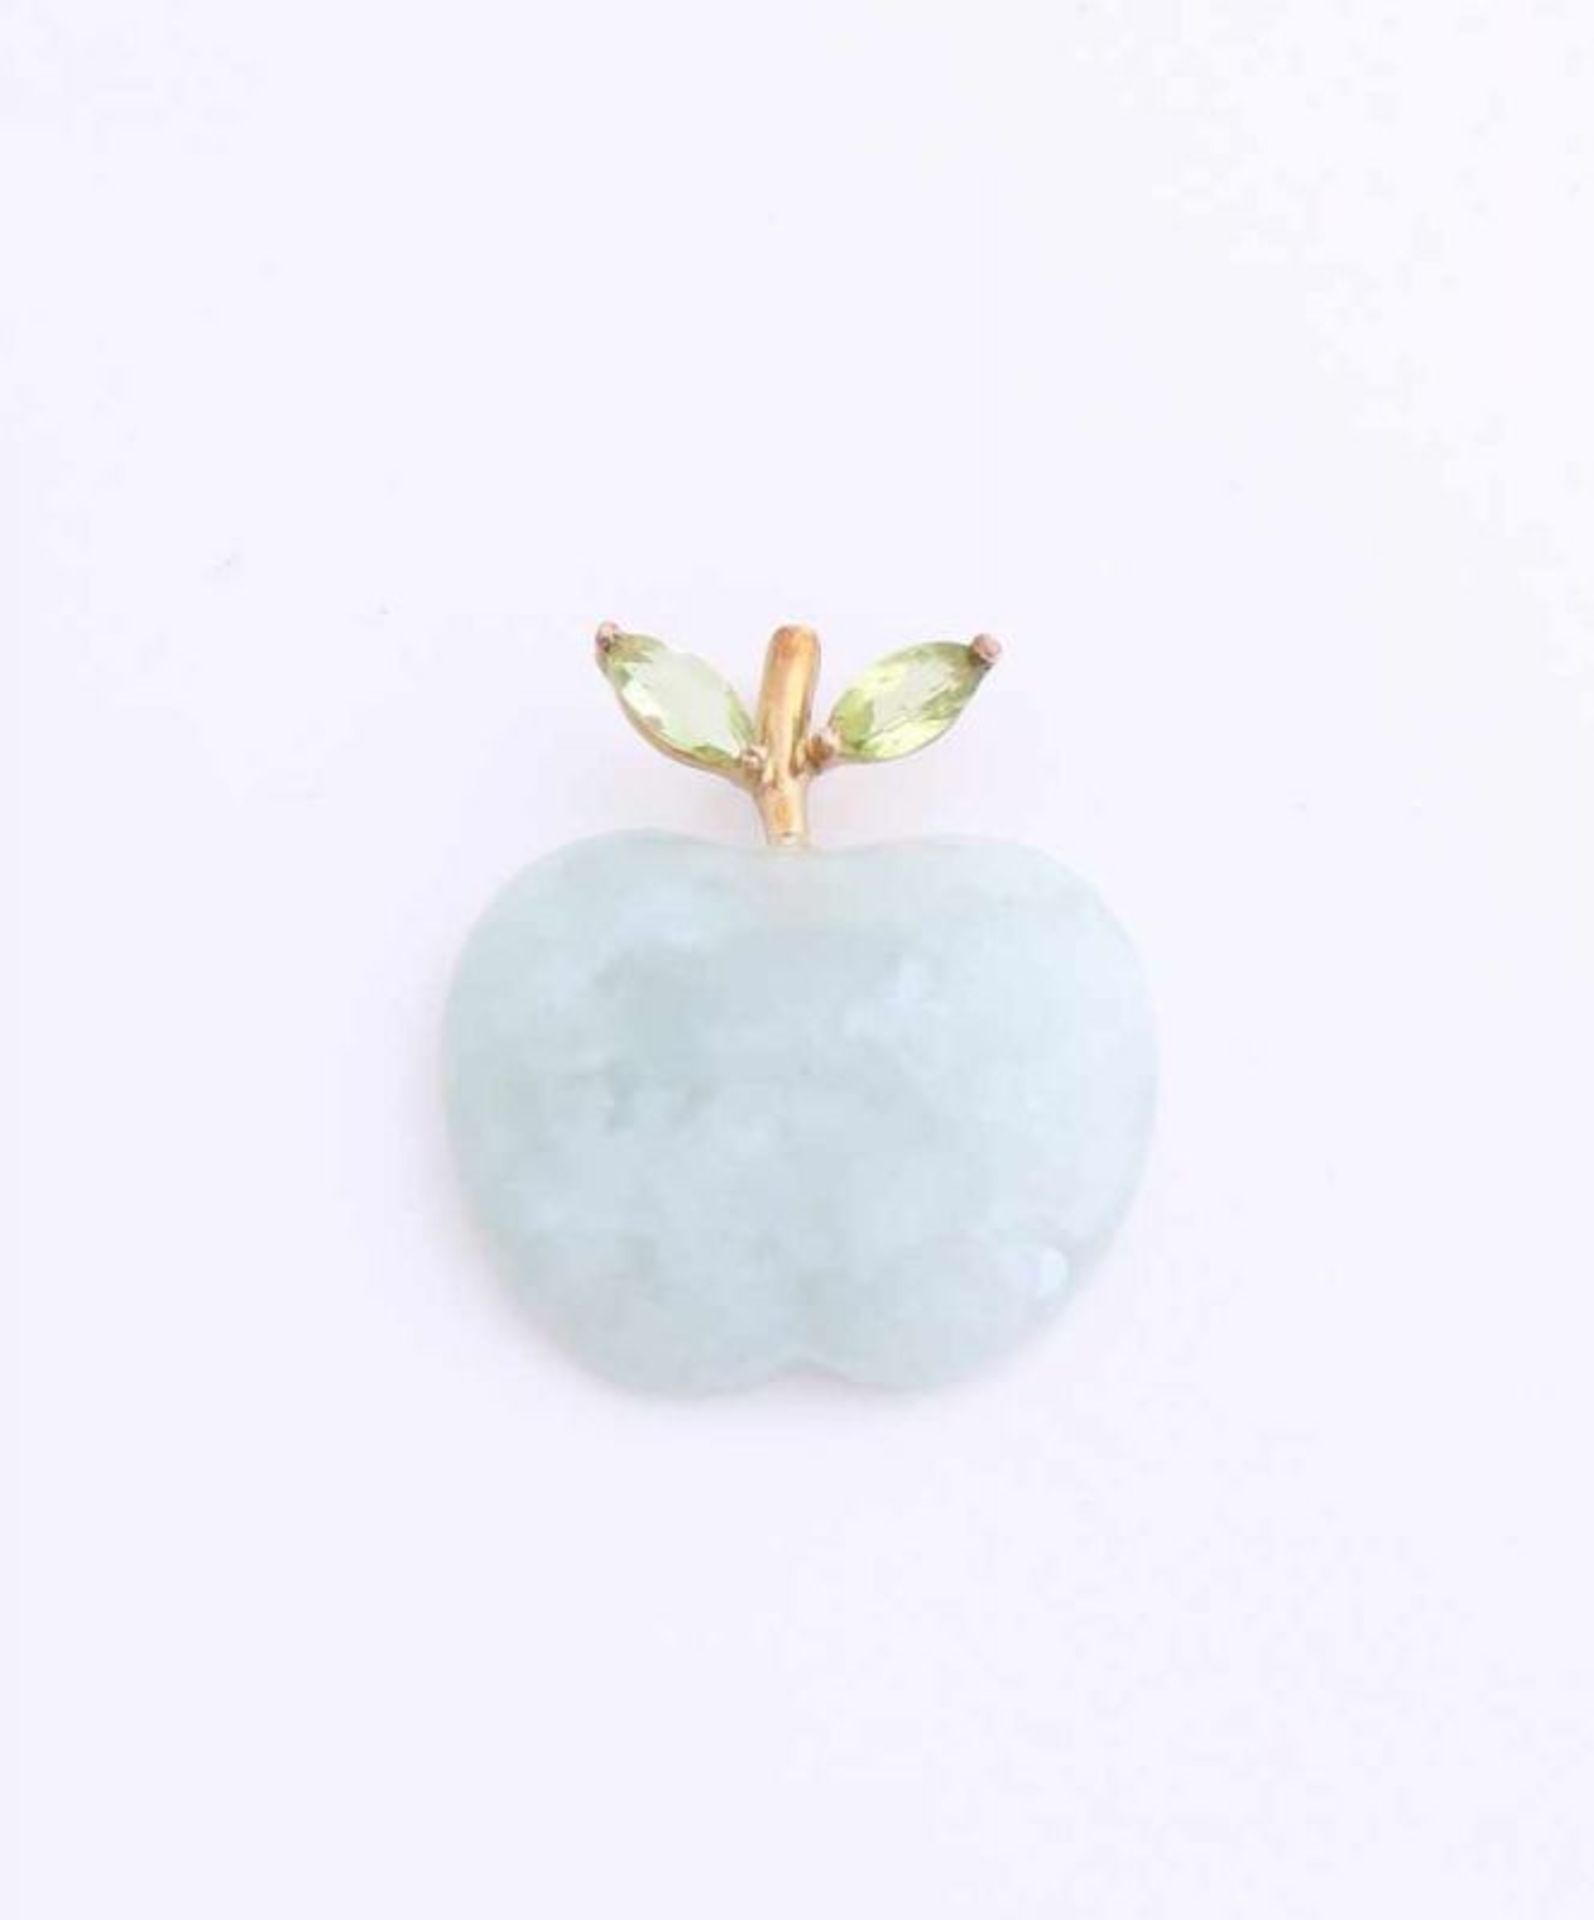 Yellow gold pendant, 585/000, in the shape of an apple made from jade with a stem with 2 marquise